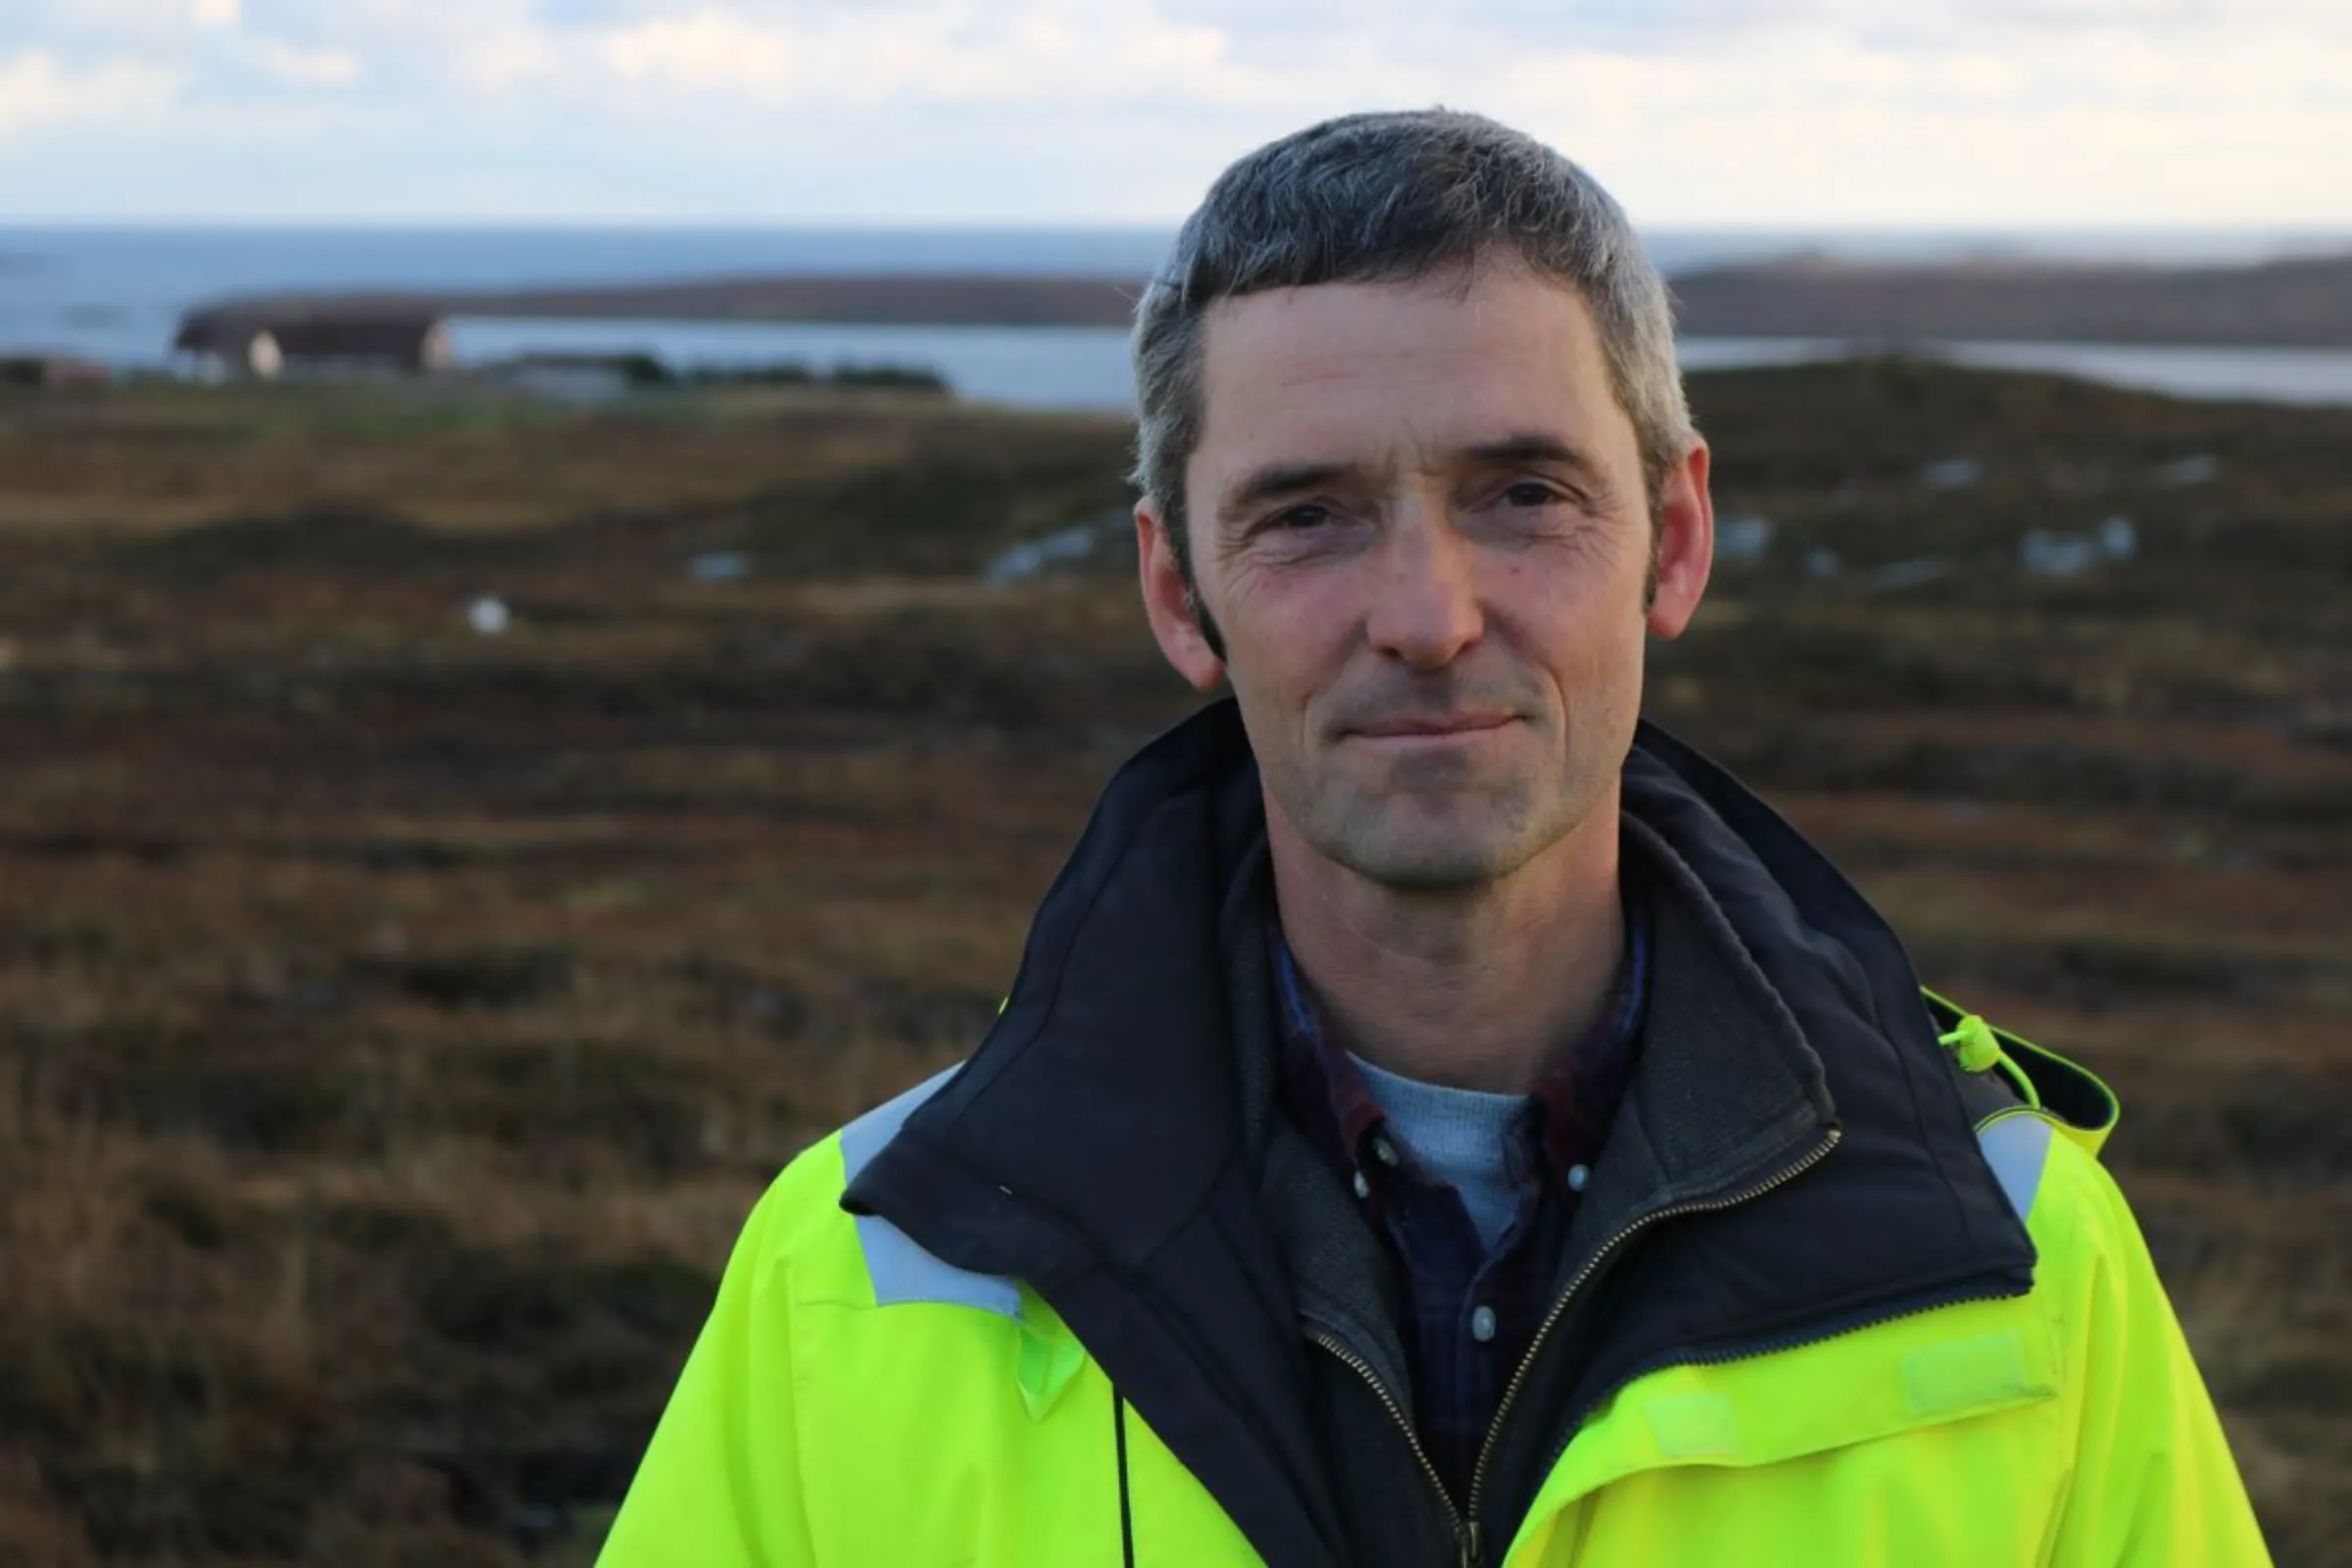 Steven Johnson founded a small business called Peatland Restoration Services in 2020 after learning about the ecosystem from his son, near Weisdale, Shetland, Scotland, November 1, 2023. Thomson Reuters Foundation/Jack Graham